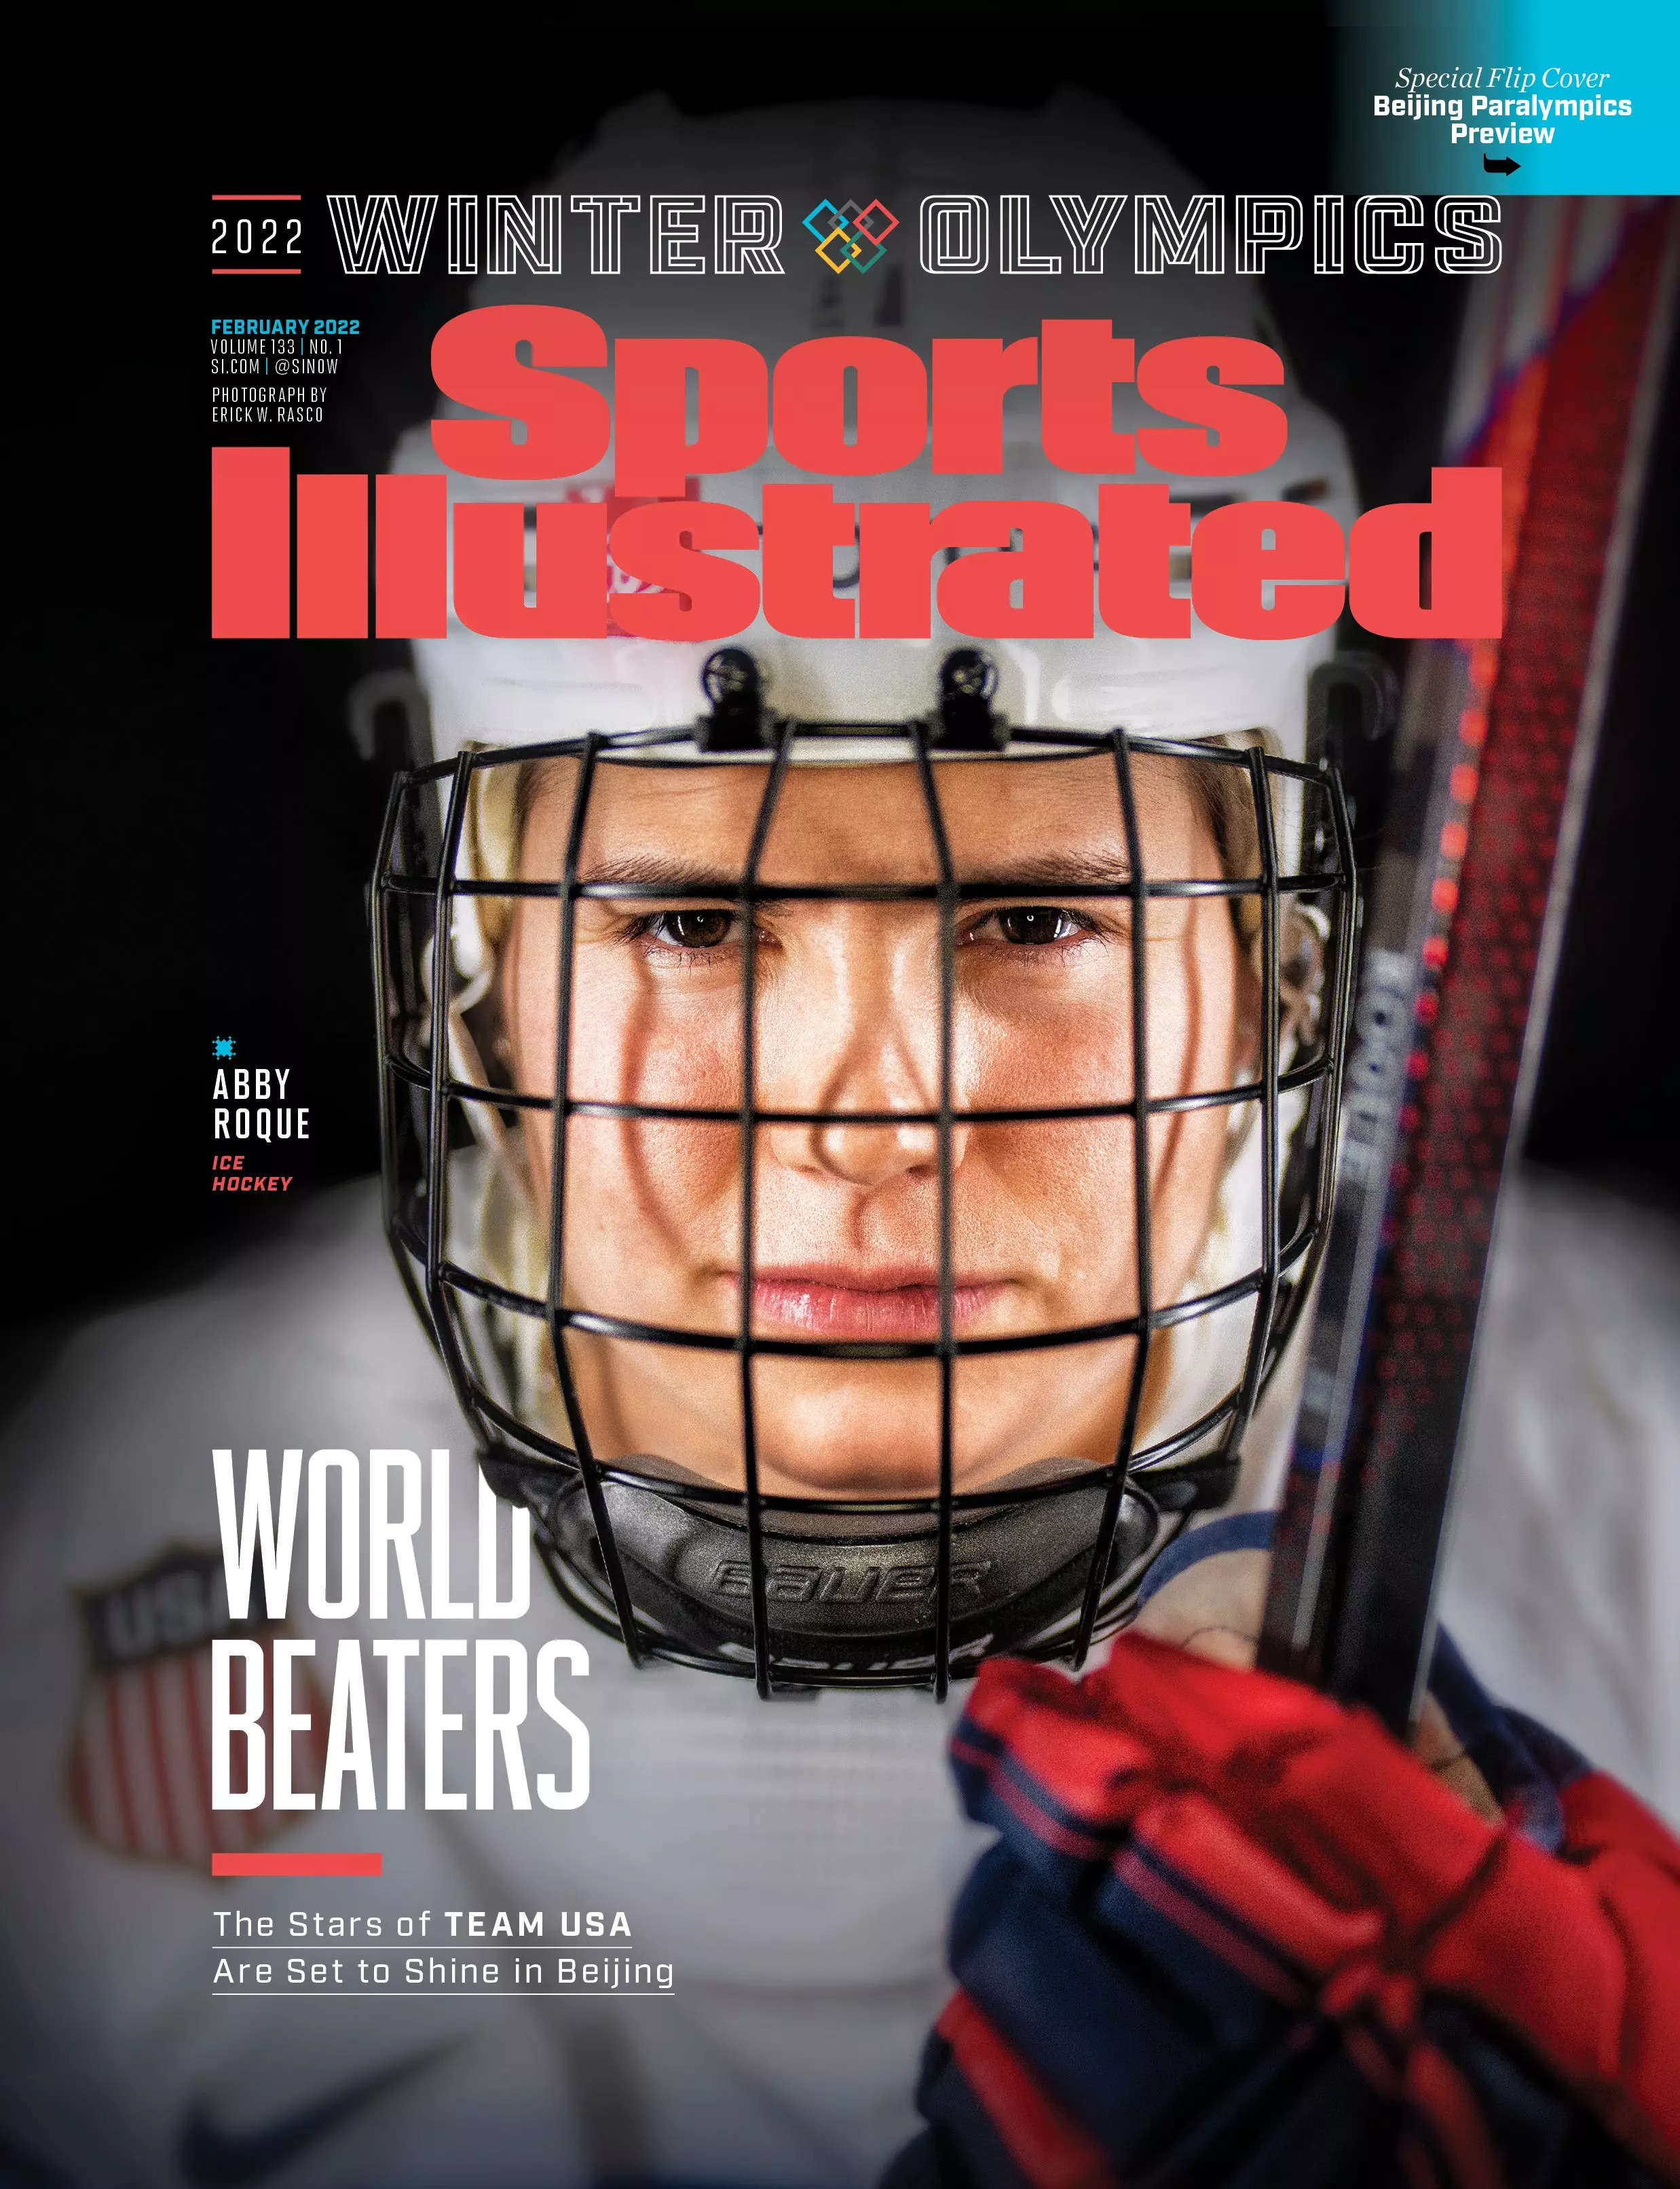 Abby Roque is one of four cover athletes for Sports Illustrated